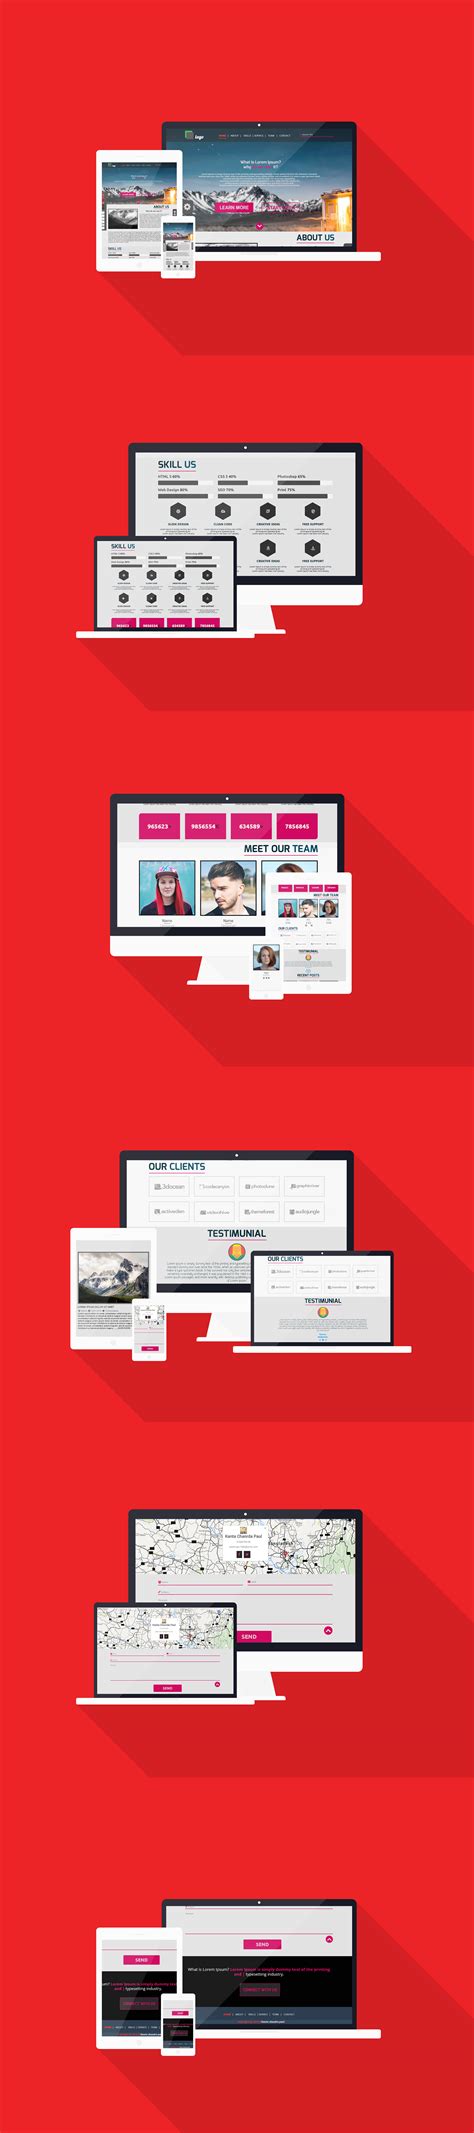 Bootstrap Psd High Hd Free Web Template On Behance